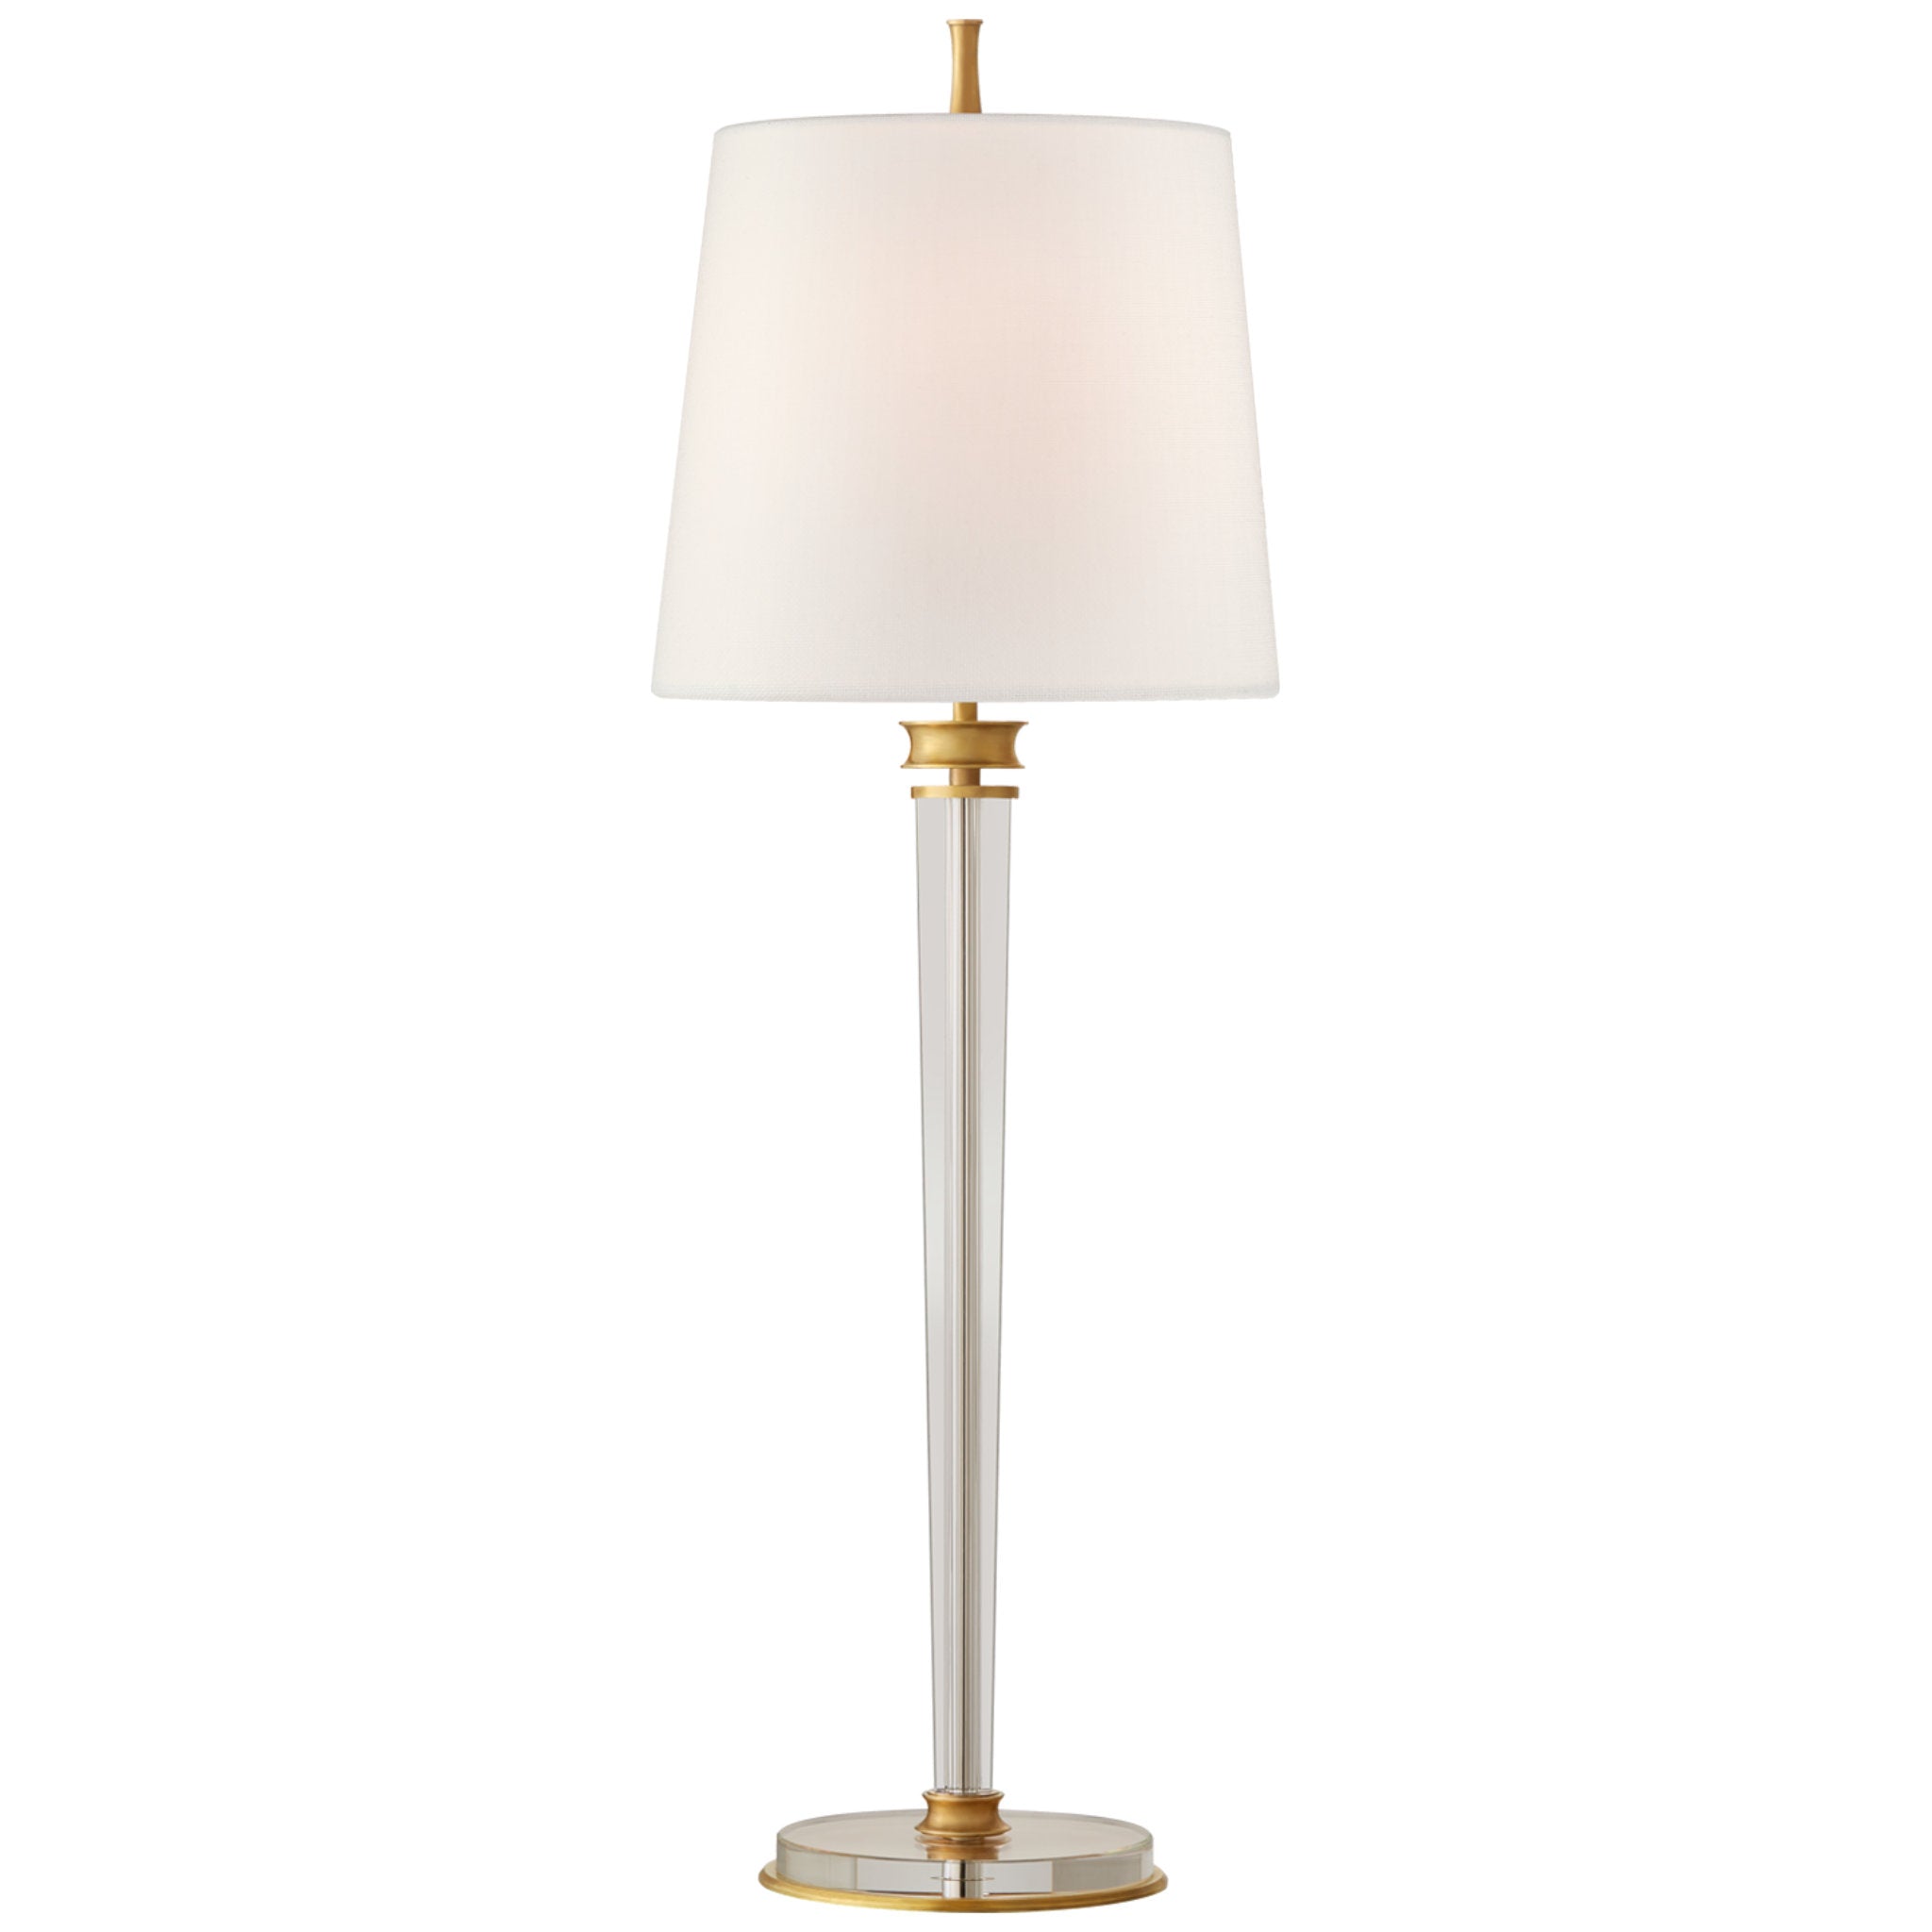 Thomas O'Brien Lyra Buffet Lamp in Hand-Rubbed Antique Brass and Crystal with Linen Shade